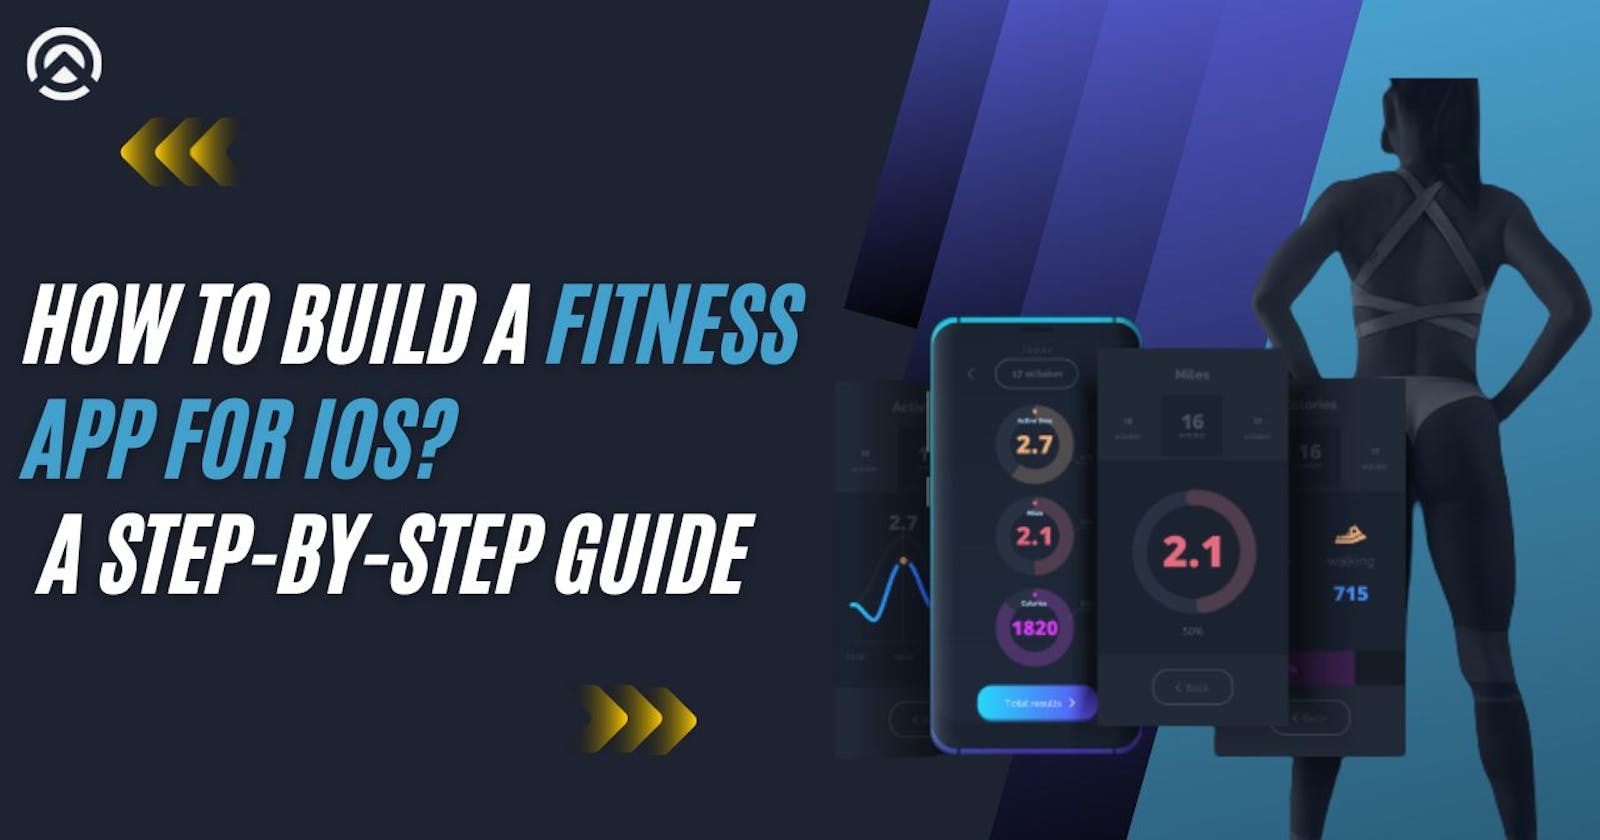 How to build a fitness app for iOS? A step-by-step guide